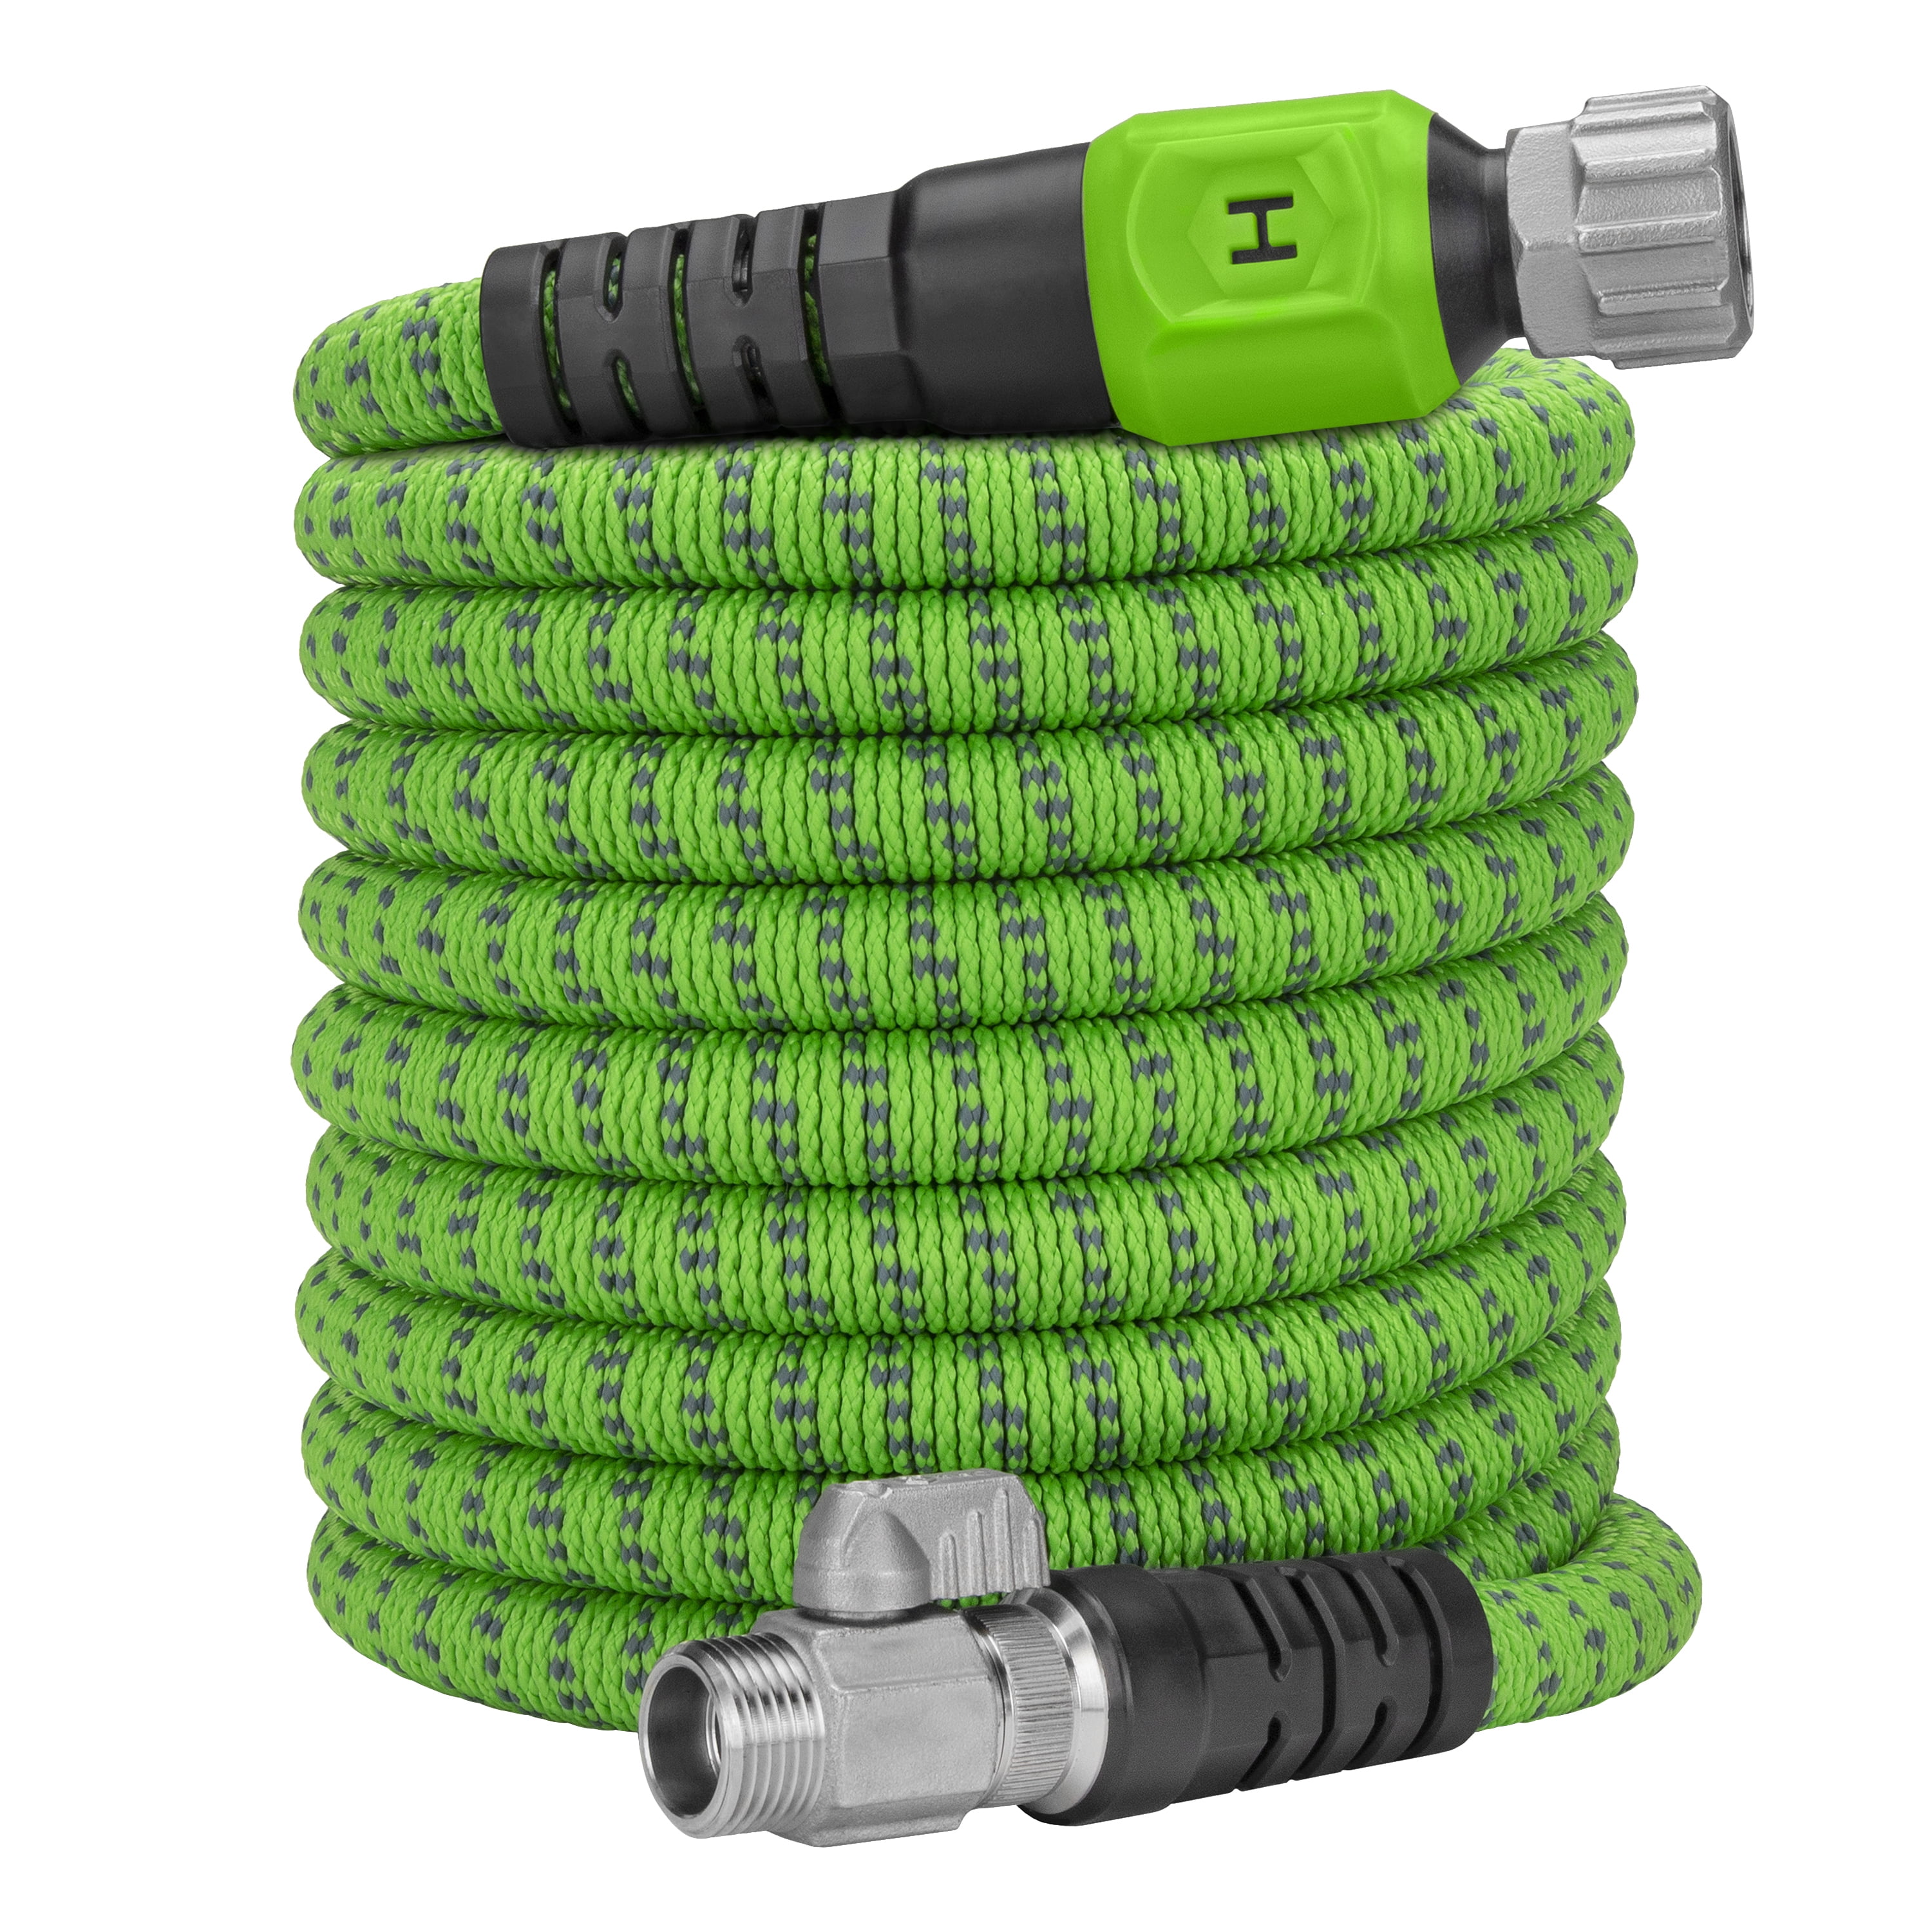 HydroTech Burst Dia. ft. Expandable Hose - Water Proof Garden 5/8in x Hose 50 Latex